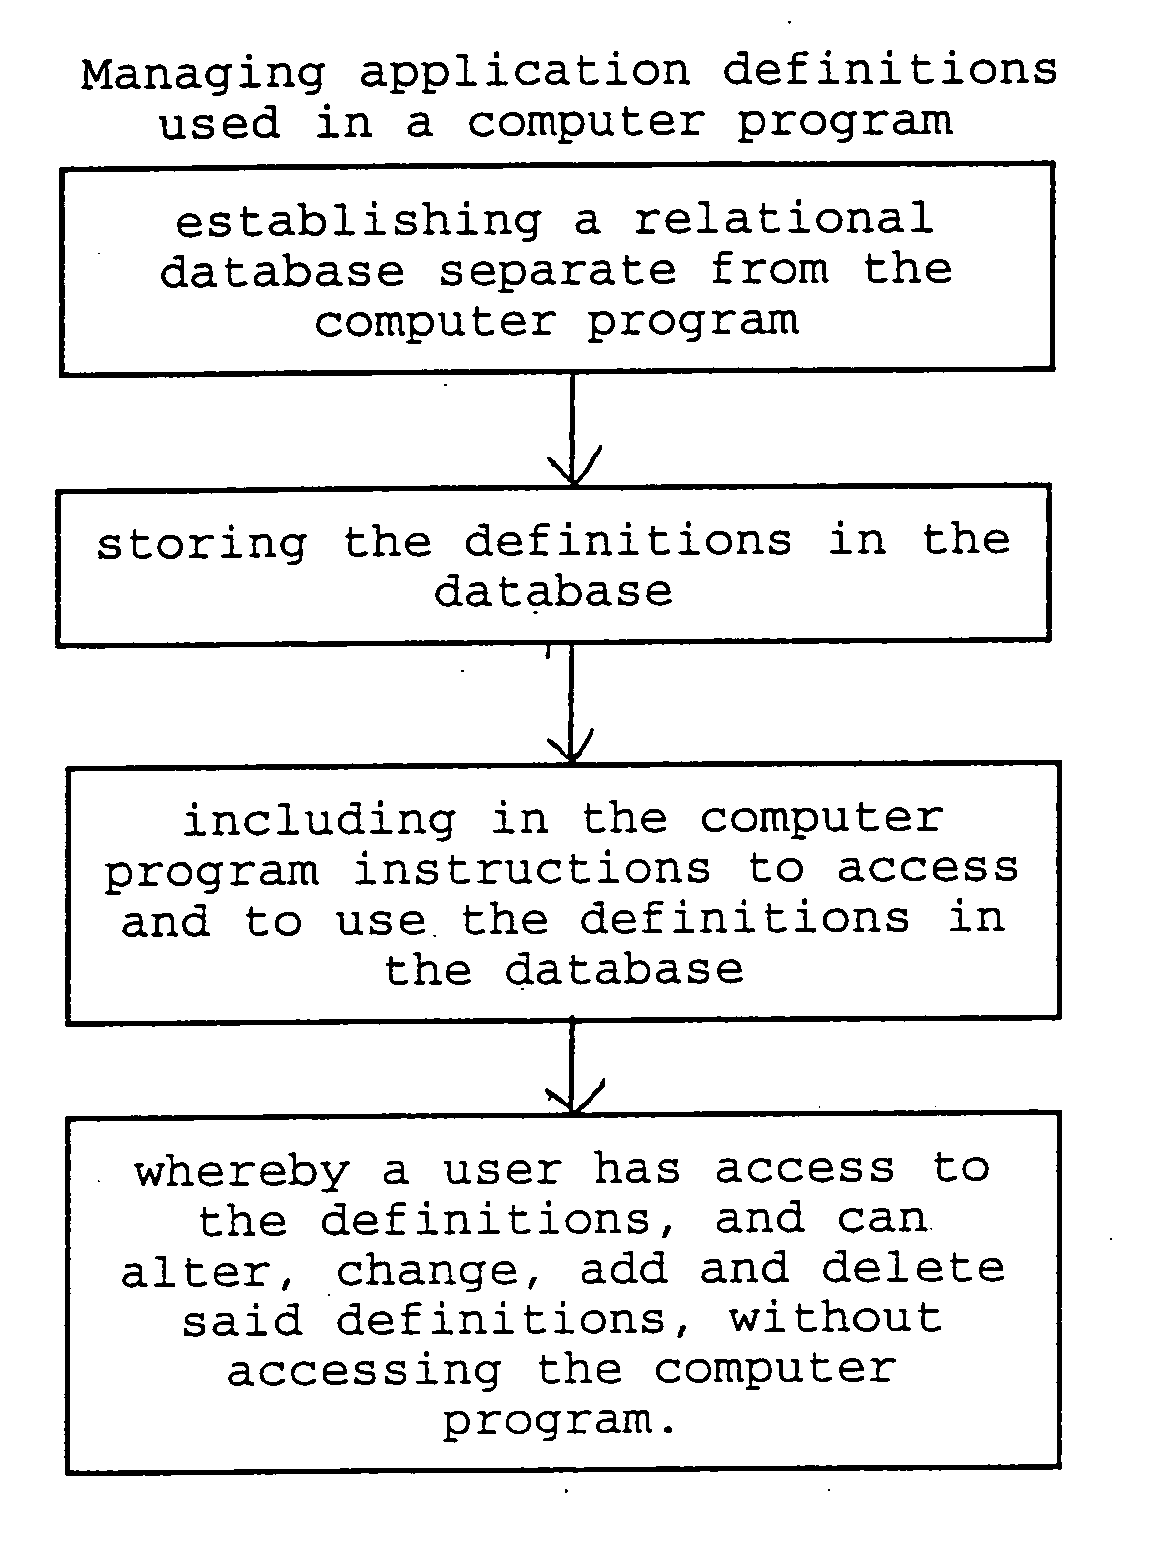 Method of managing application definitions used in a computer program